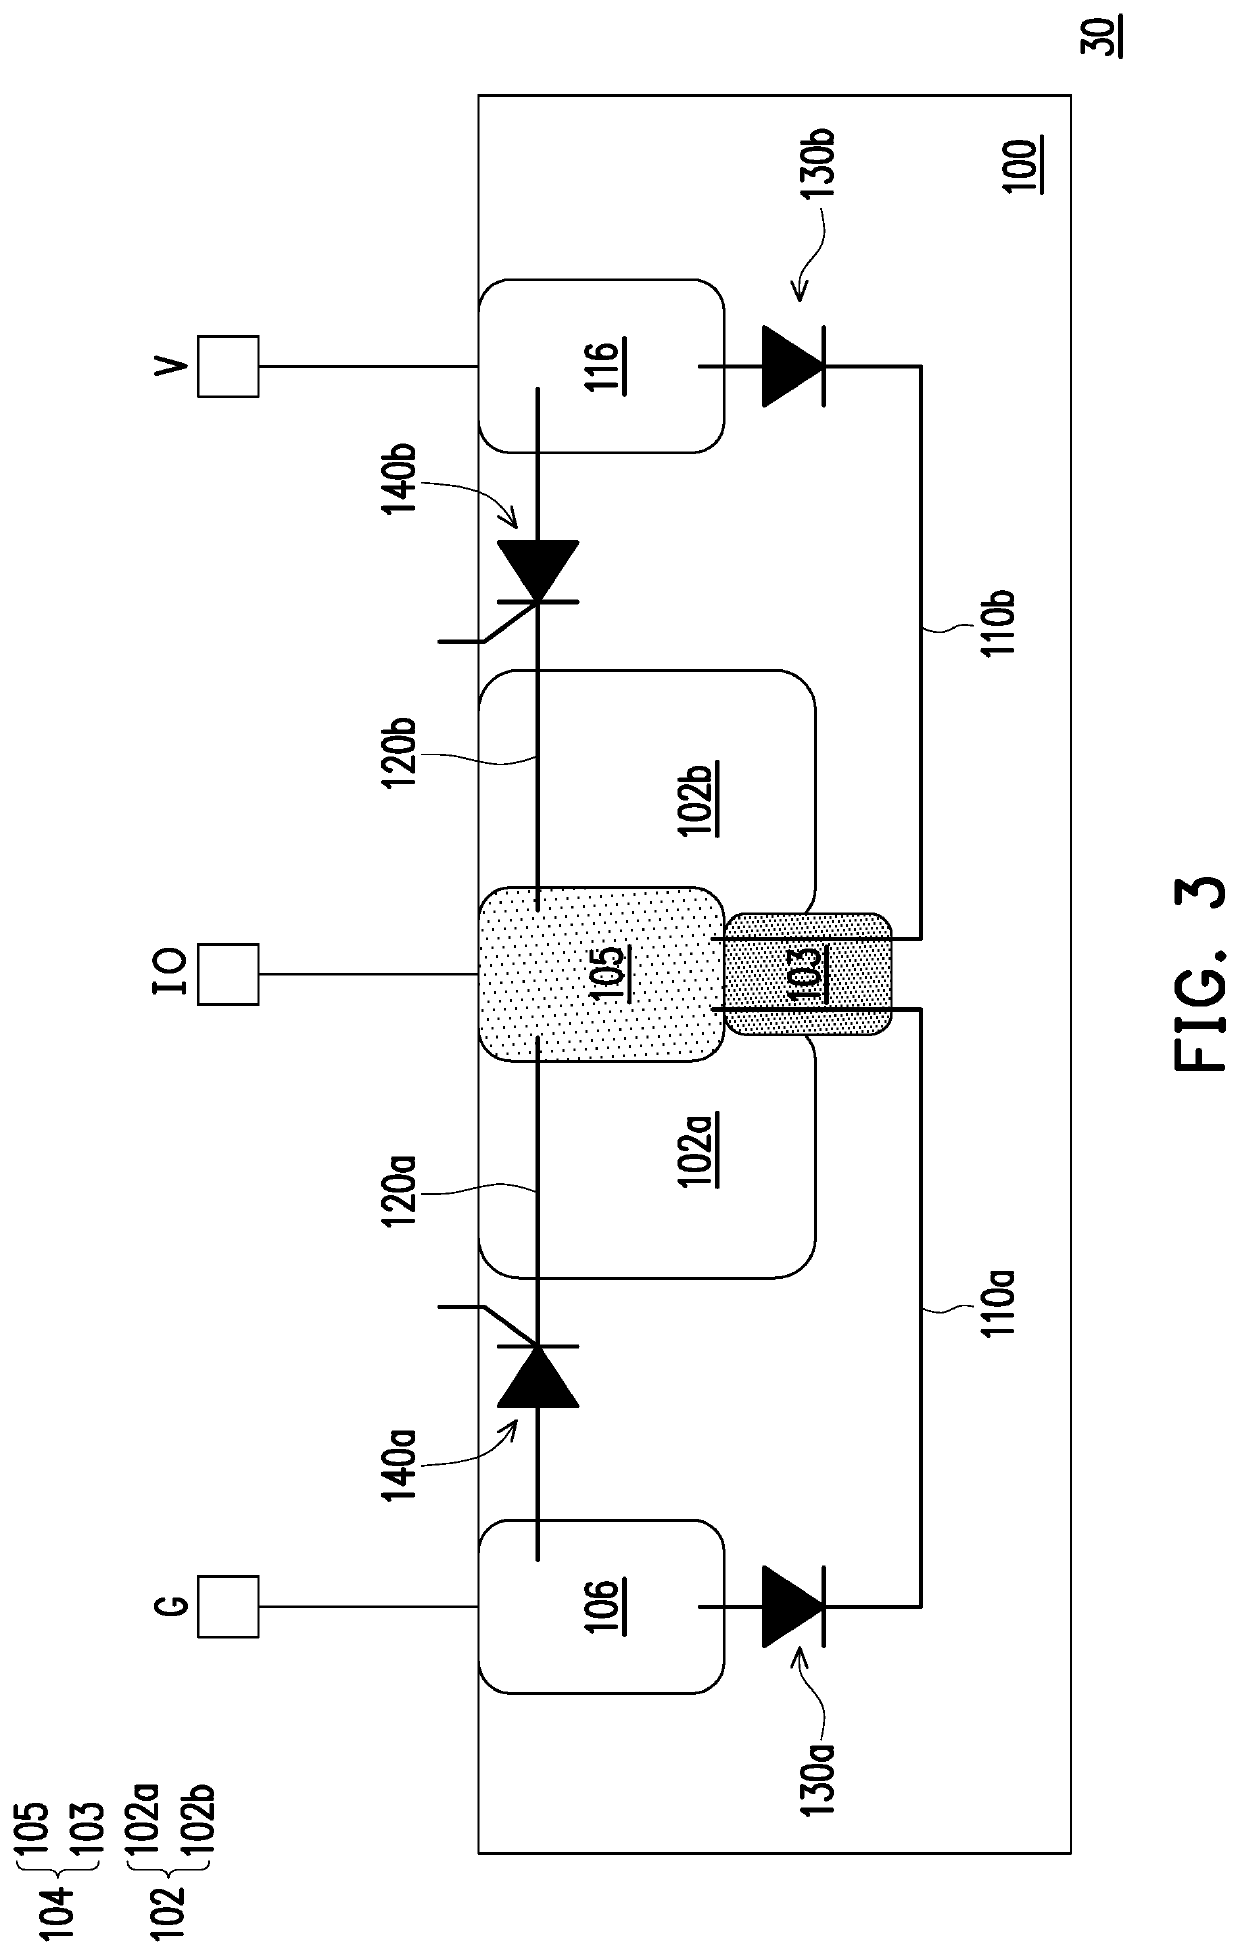 Semiconductor device with diode and silicon controlled rectifier (SCR)